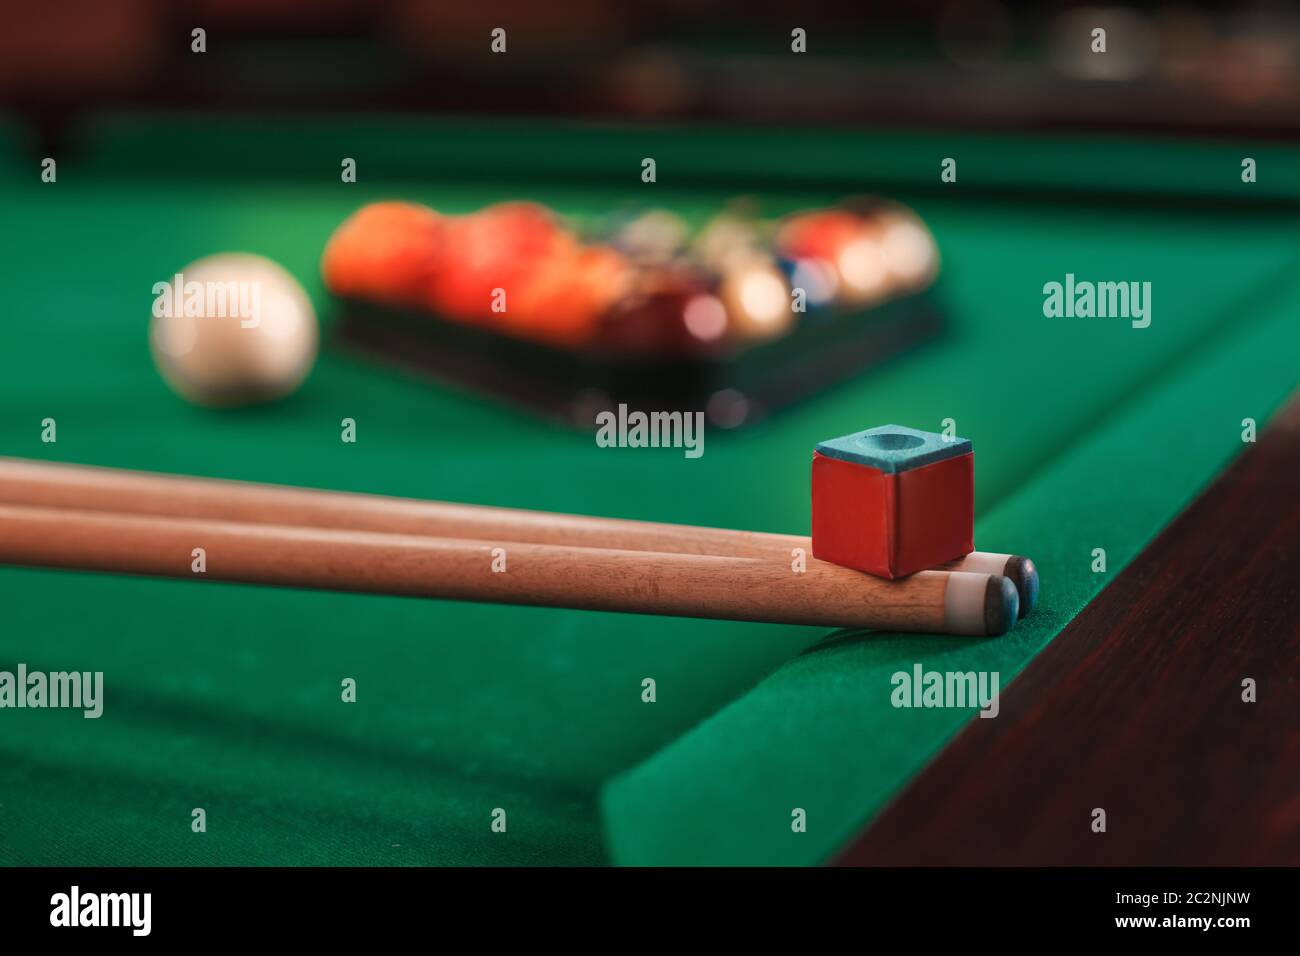 Cues and chalk on a pool table. Billiard balls in triangle on the background. Stock Photo